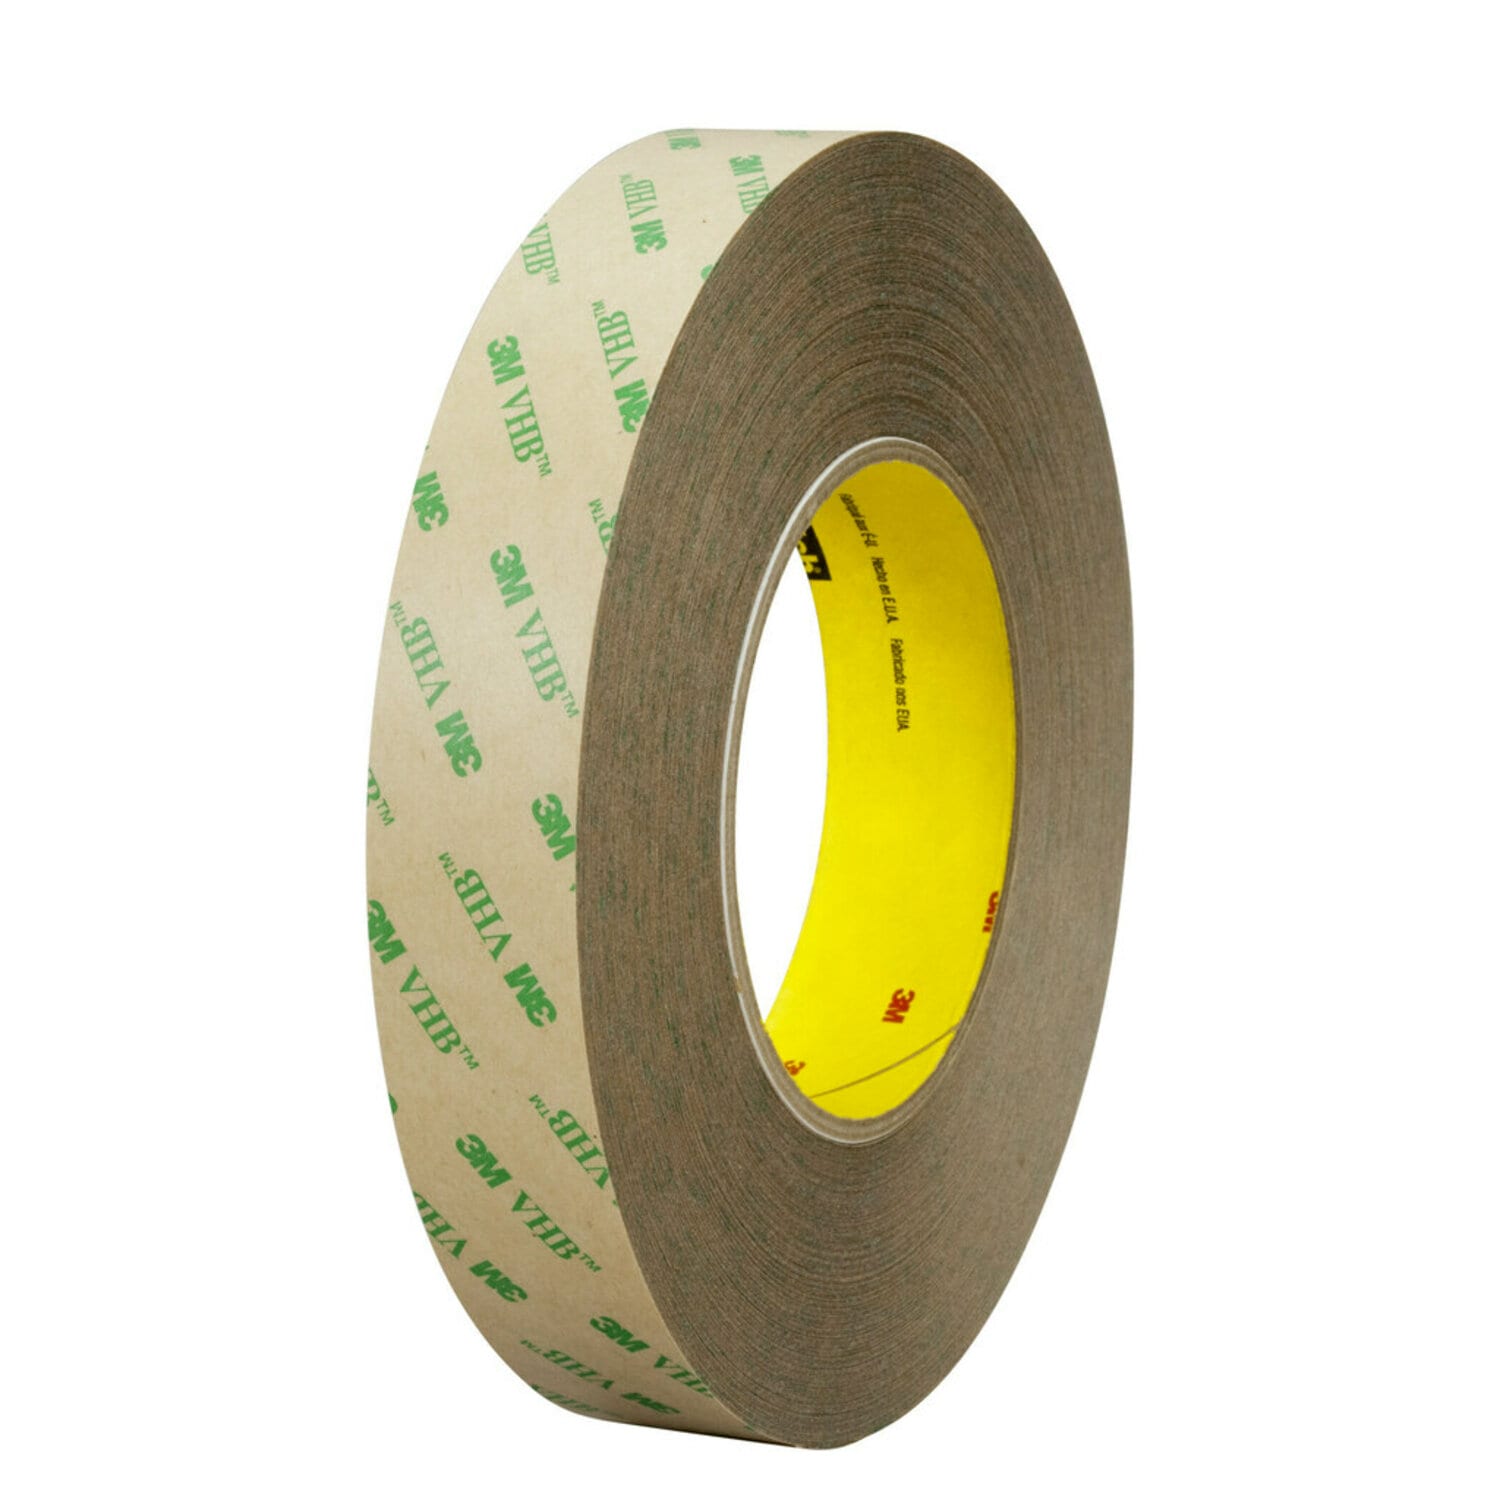 Hook & Loop Tape Roll [1 Inch X 32.8 Feet] with Strong Adhesive 